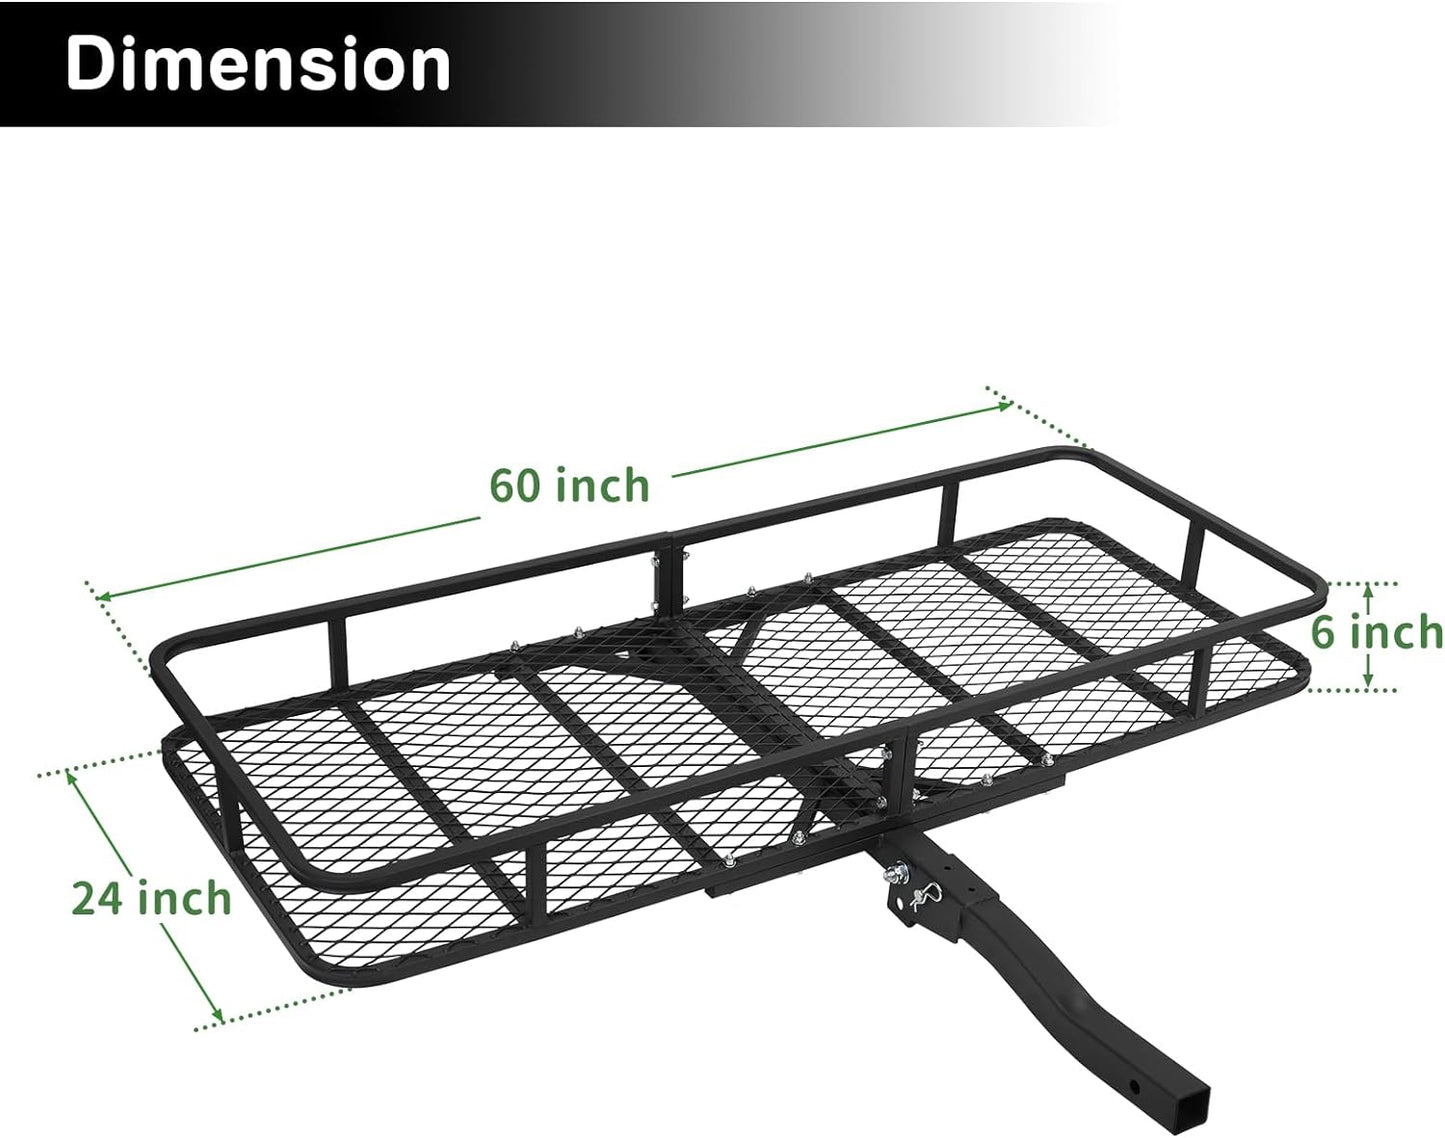 Trailer Hitch Cargo Carrier Rack, 60"x24"x6" Folding Cargo Carrier Hitch Mount, Vehicle Cargo Basket for SUV, RV, Truck, Van, Fits 2" Receiver 500 lbs Load Capacity